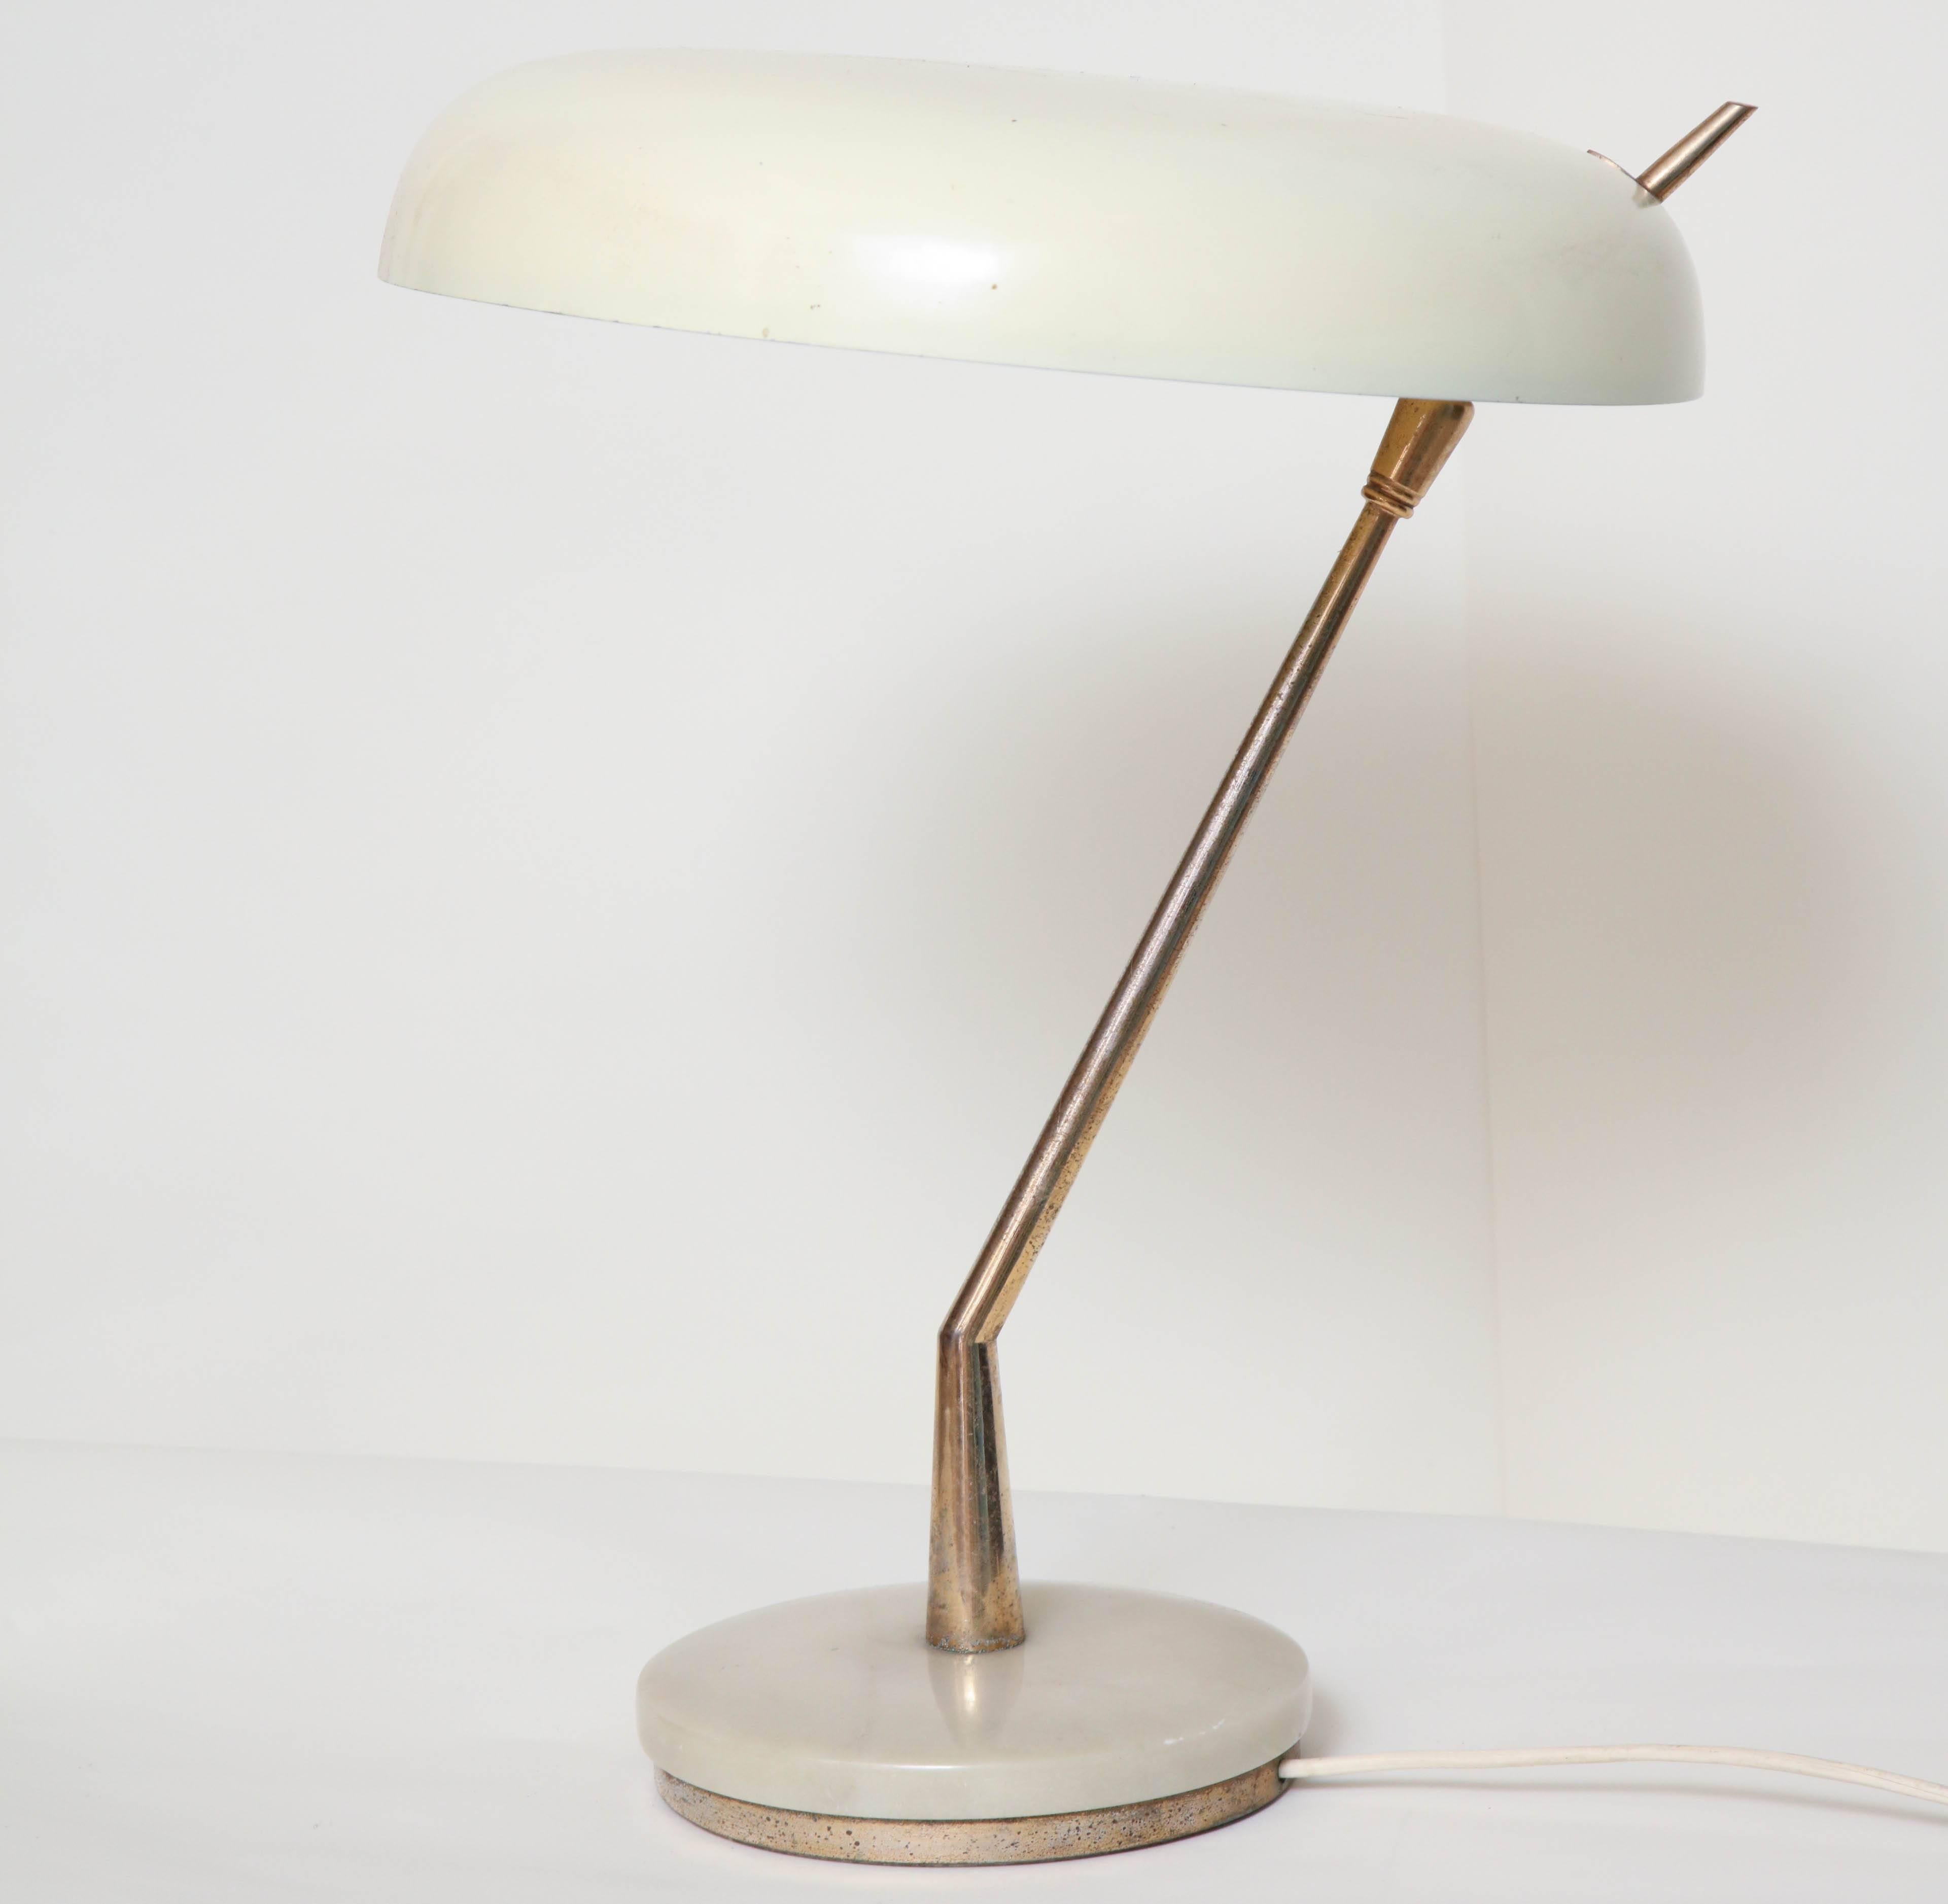 Articulated table lamp attributed to Arredoluce Italian Mid-Century Modern, 1950s.